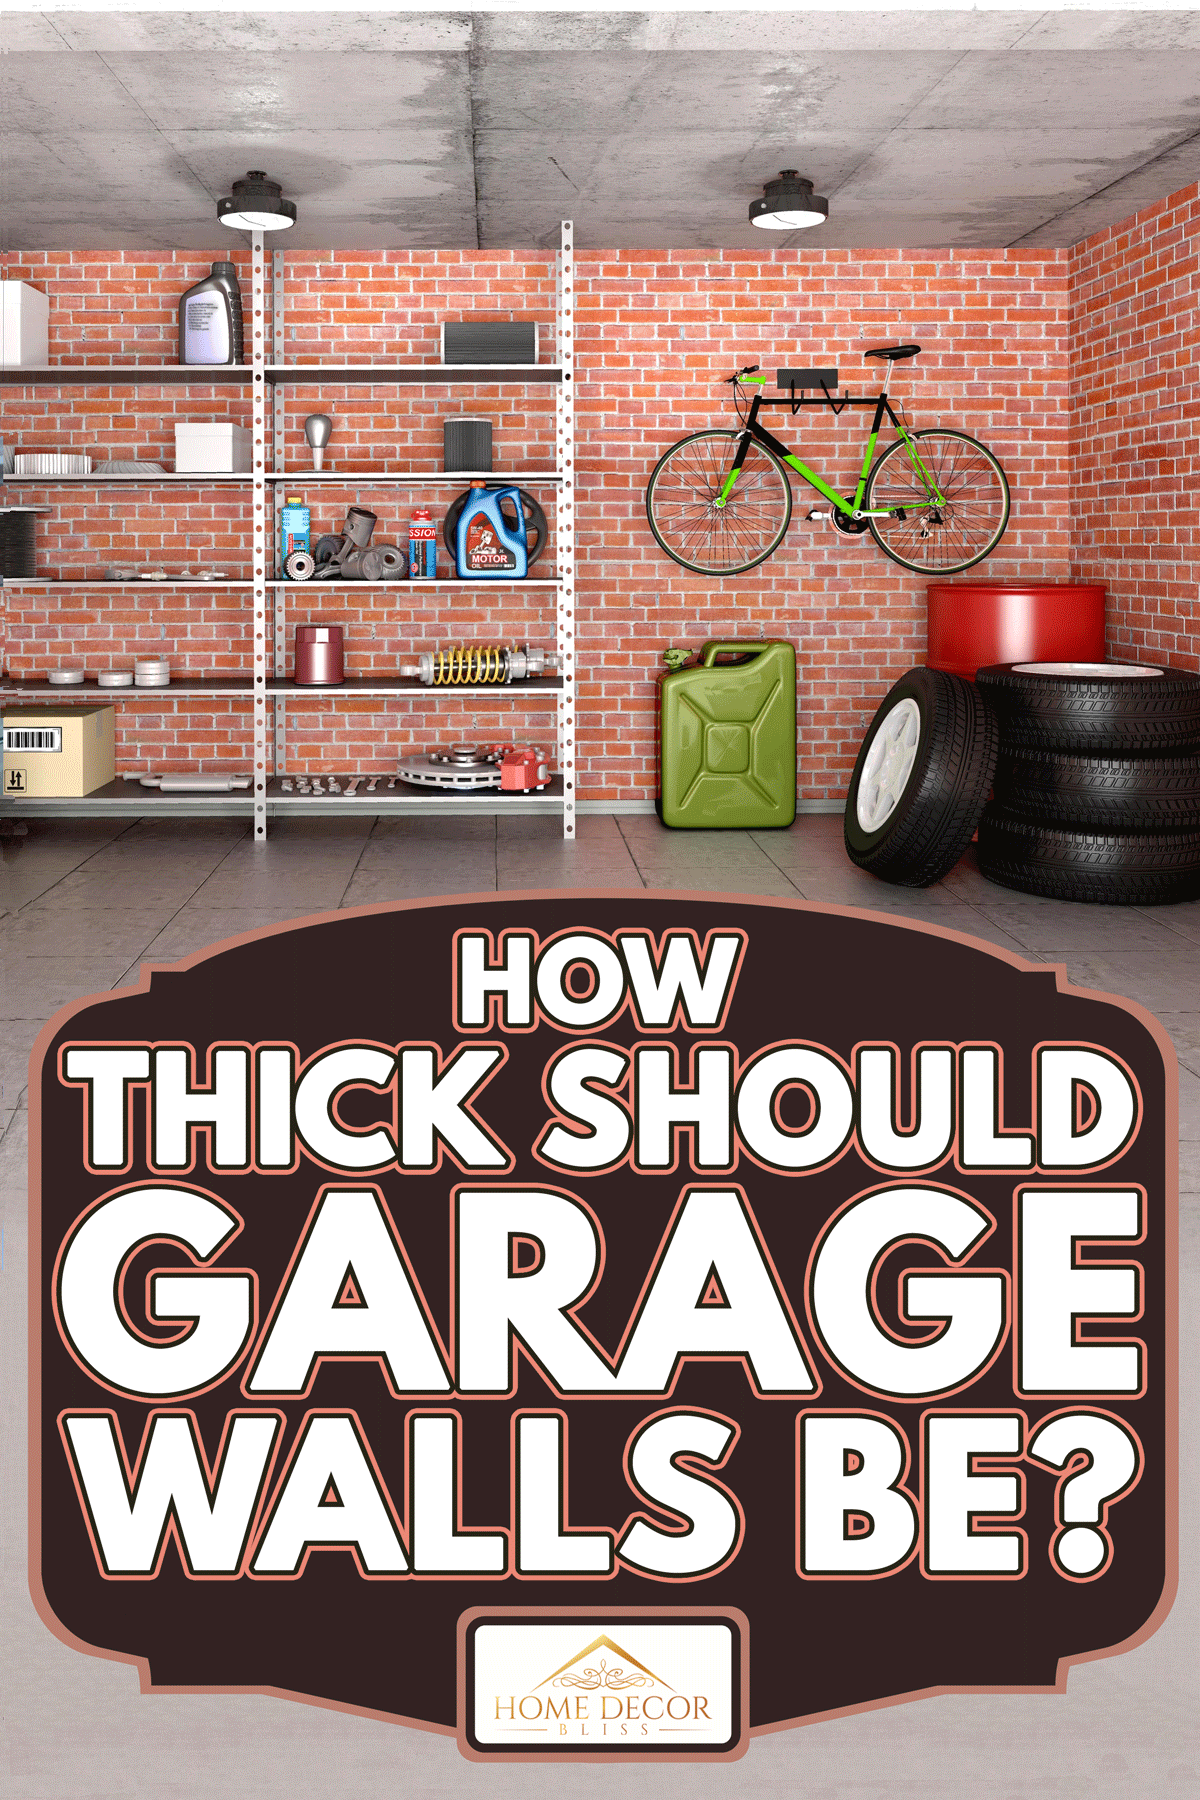 Interior garage with tools, equipment and wheels, How Thick Should Garage Walls Be?